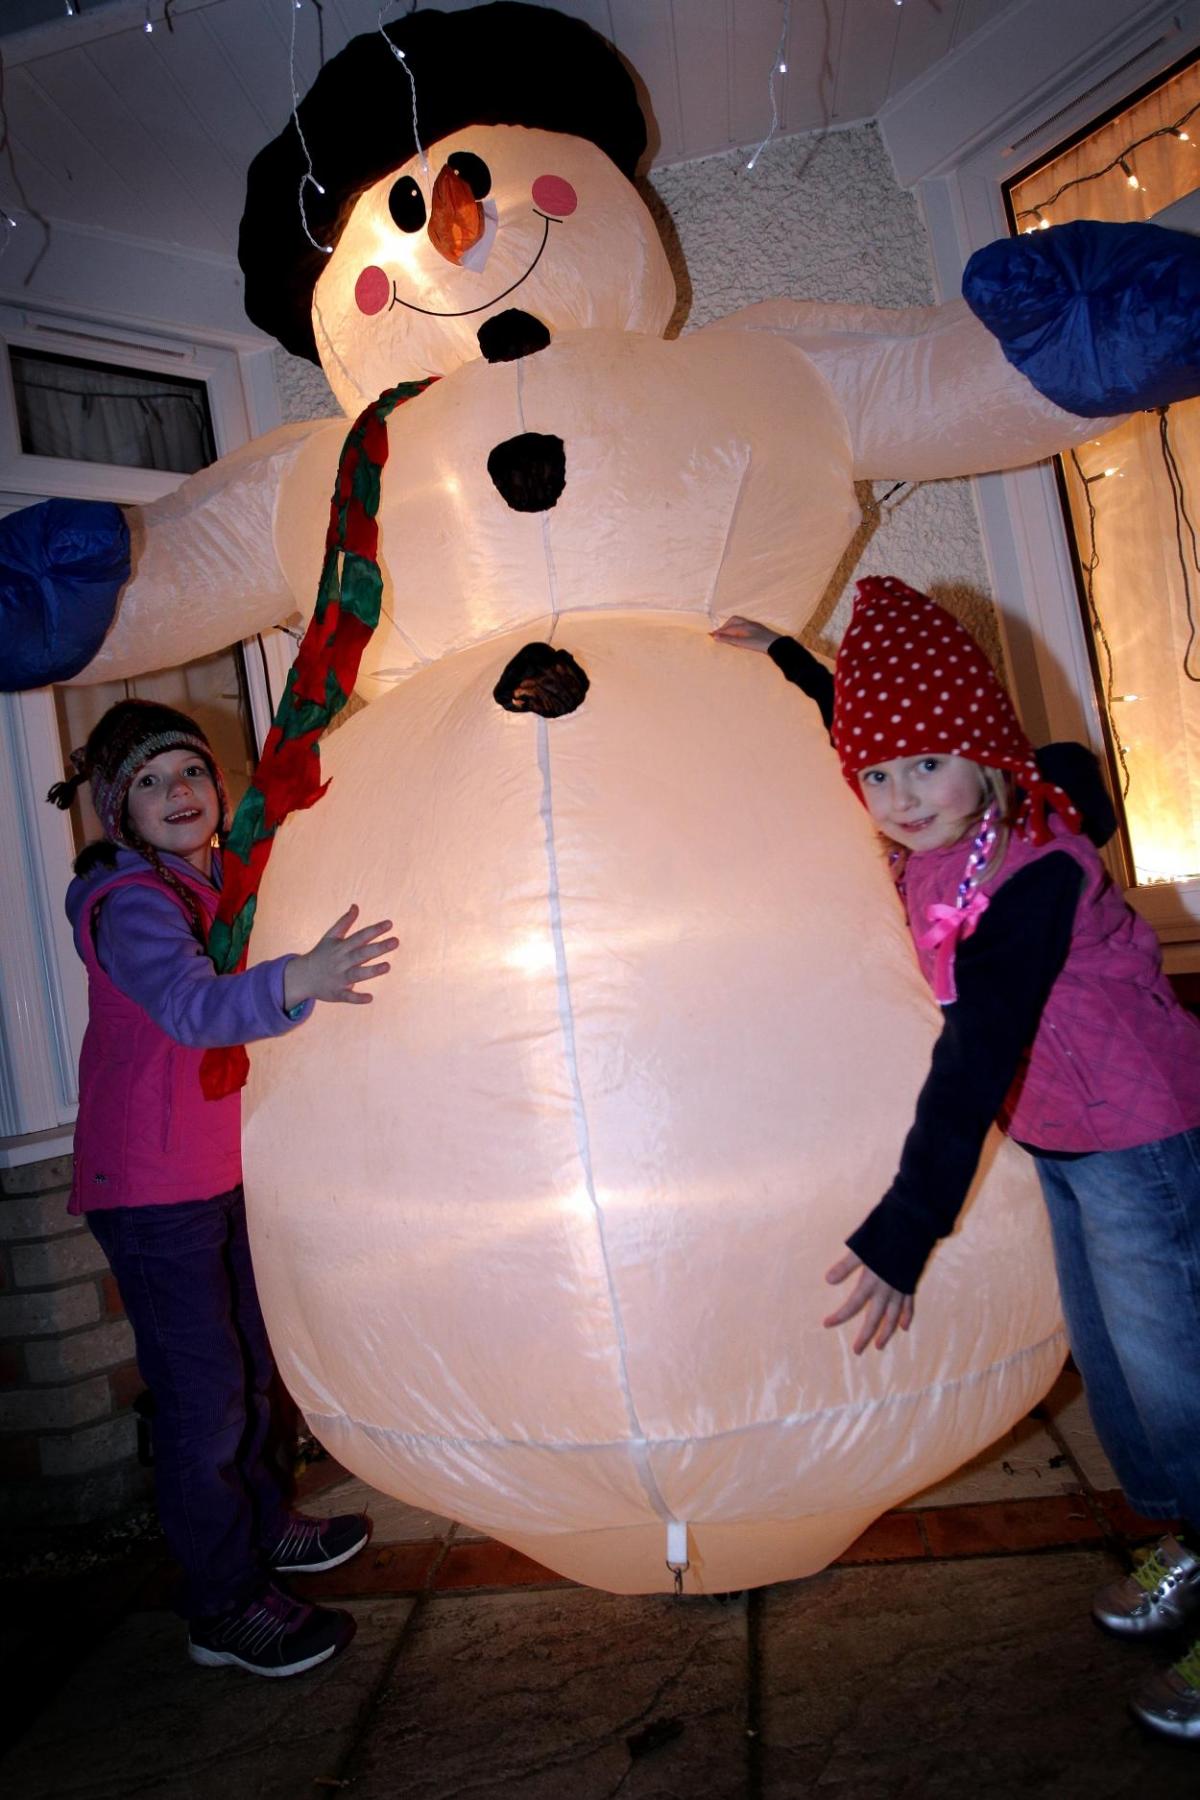 All our pictures from Runton Road lights switch-on 